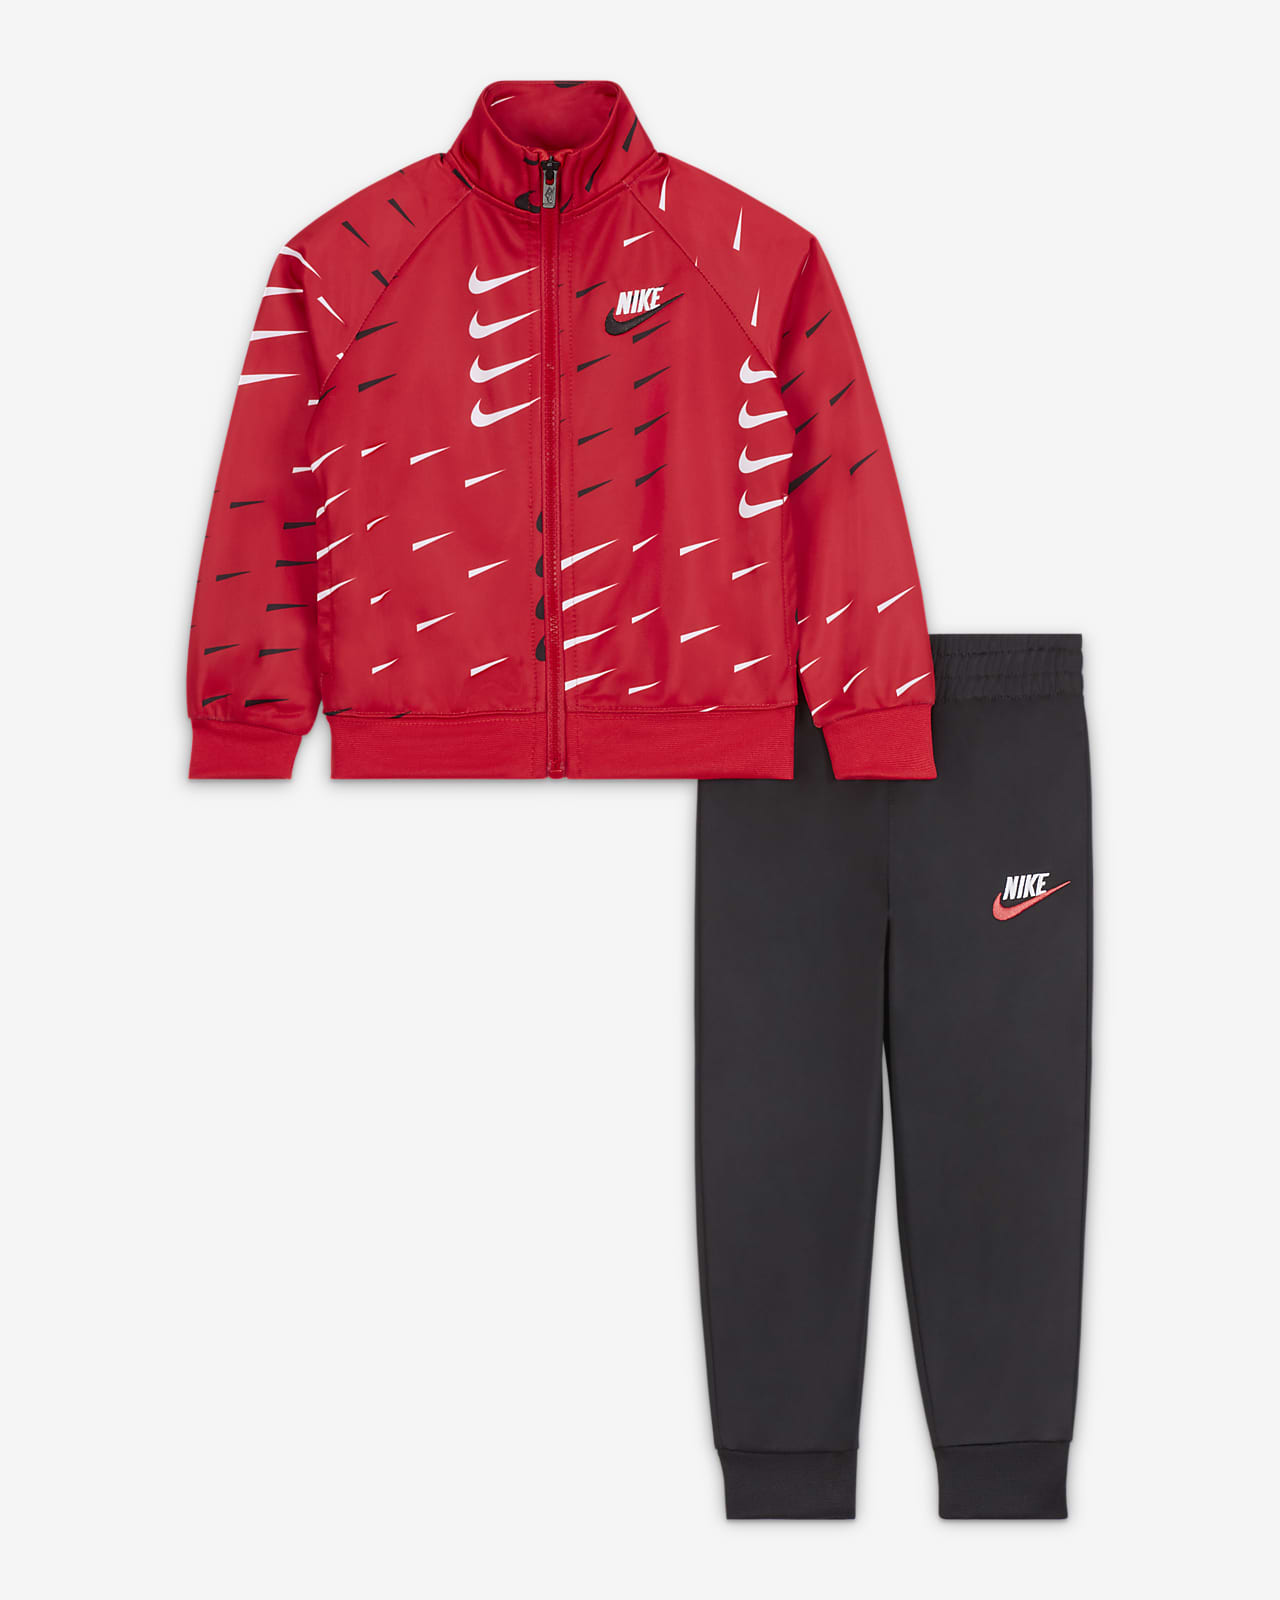 1 year old nike tracksuit